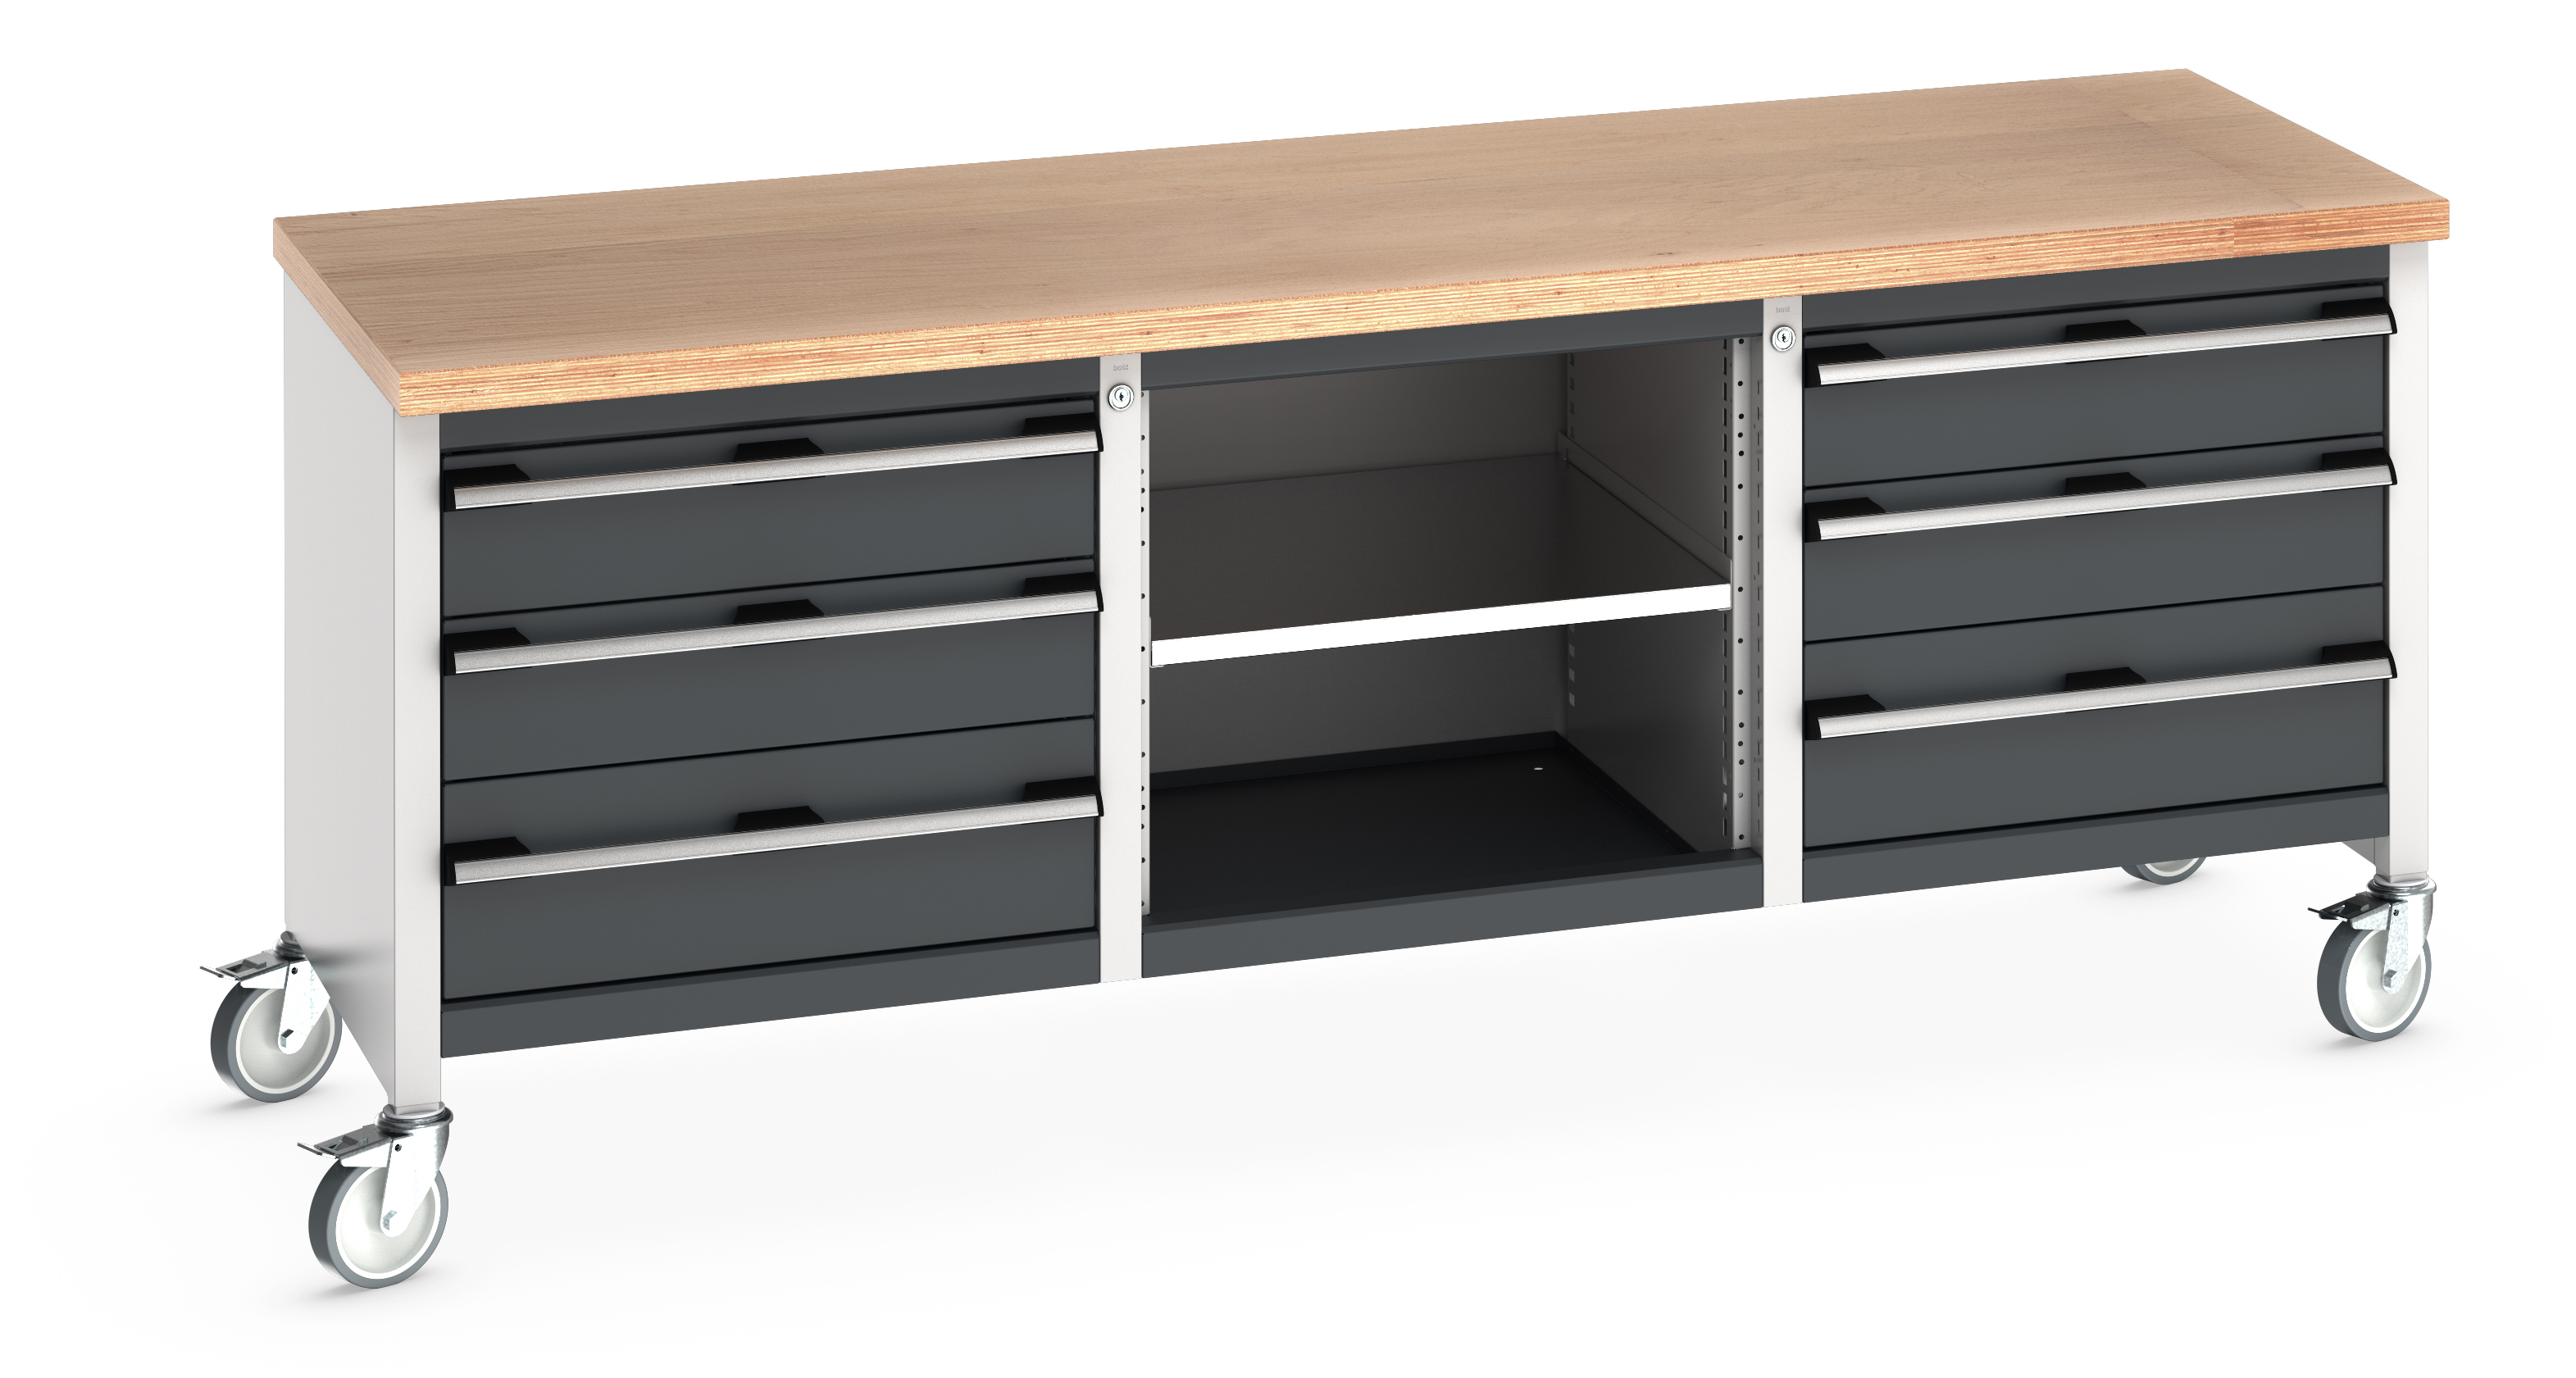 Bott Cubio Mobile Storage Bench With 3 Drawer Cabinet / Open Cupboard / 3 Drawer Cabinet - 41002130.19V